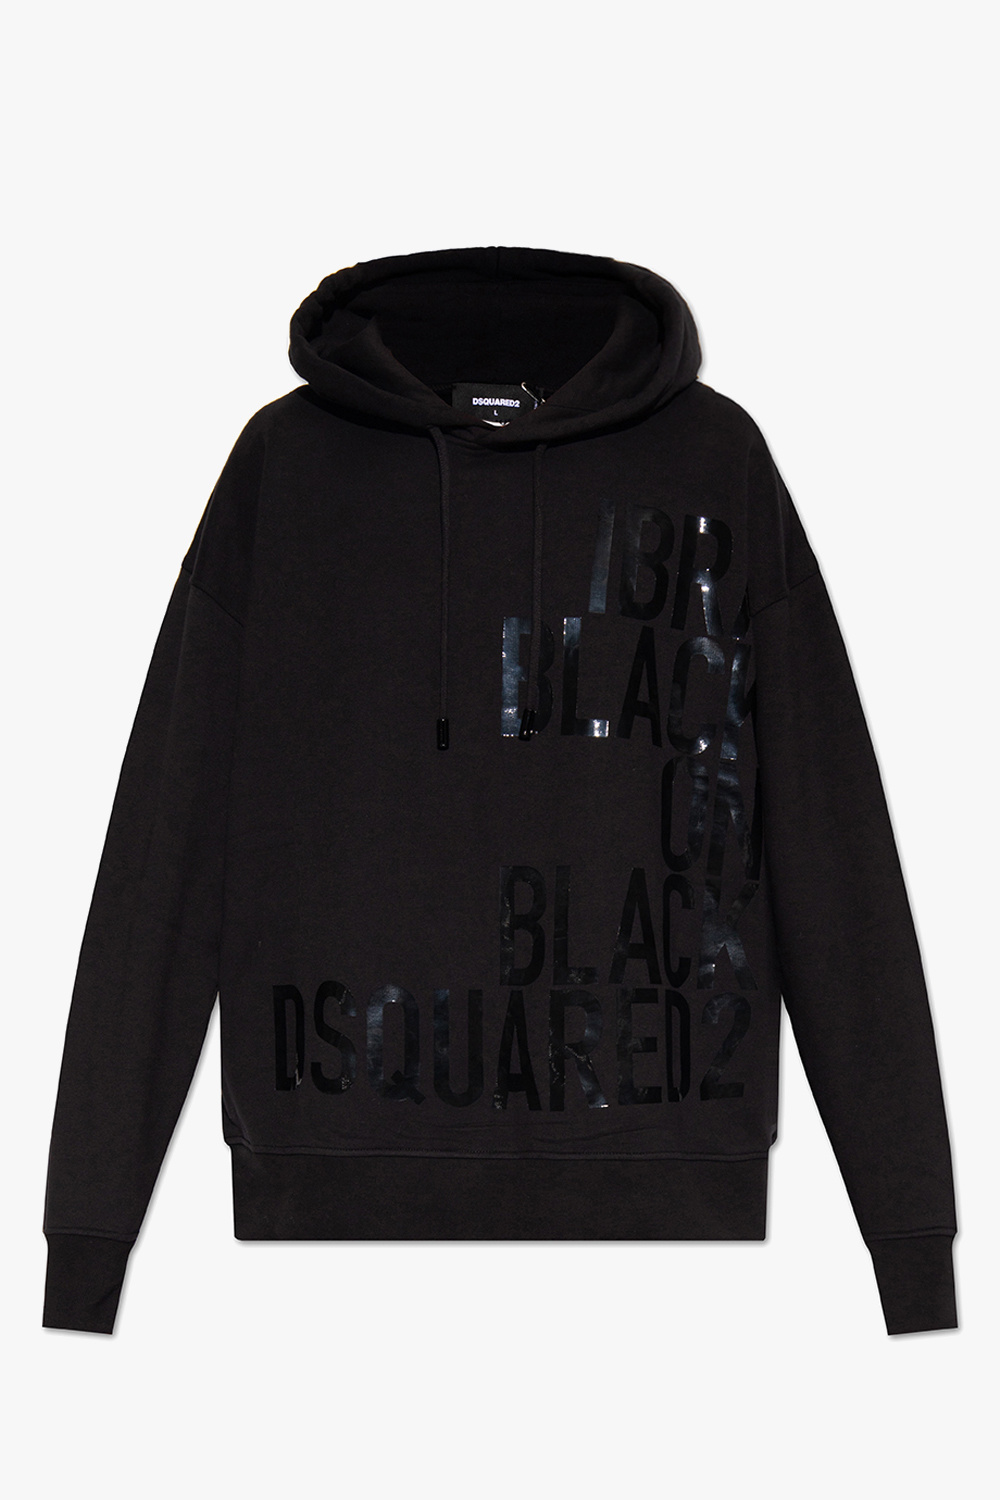 Dsquared2 Hoodie with logo print